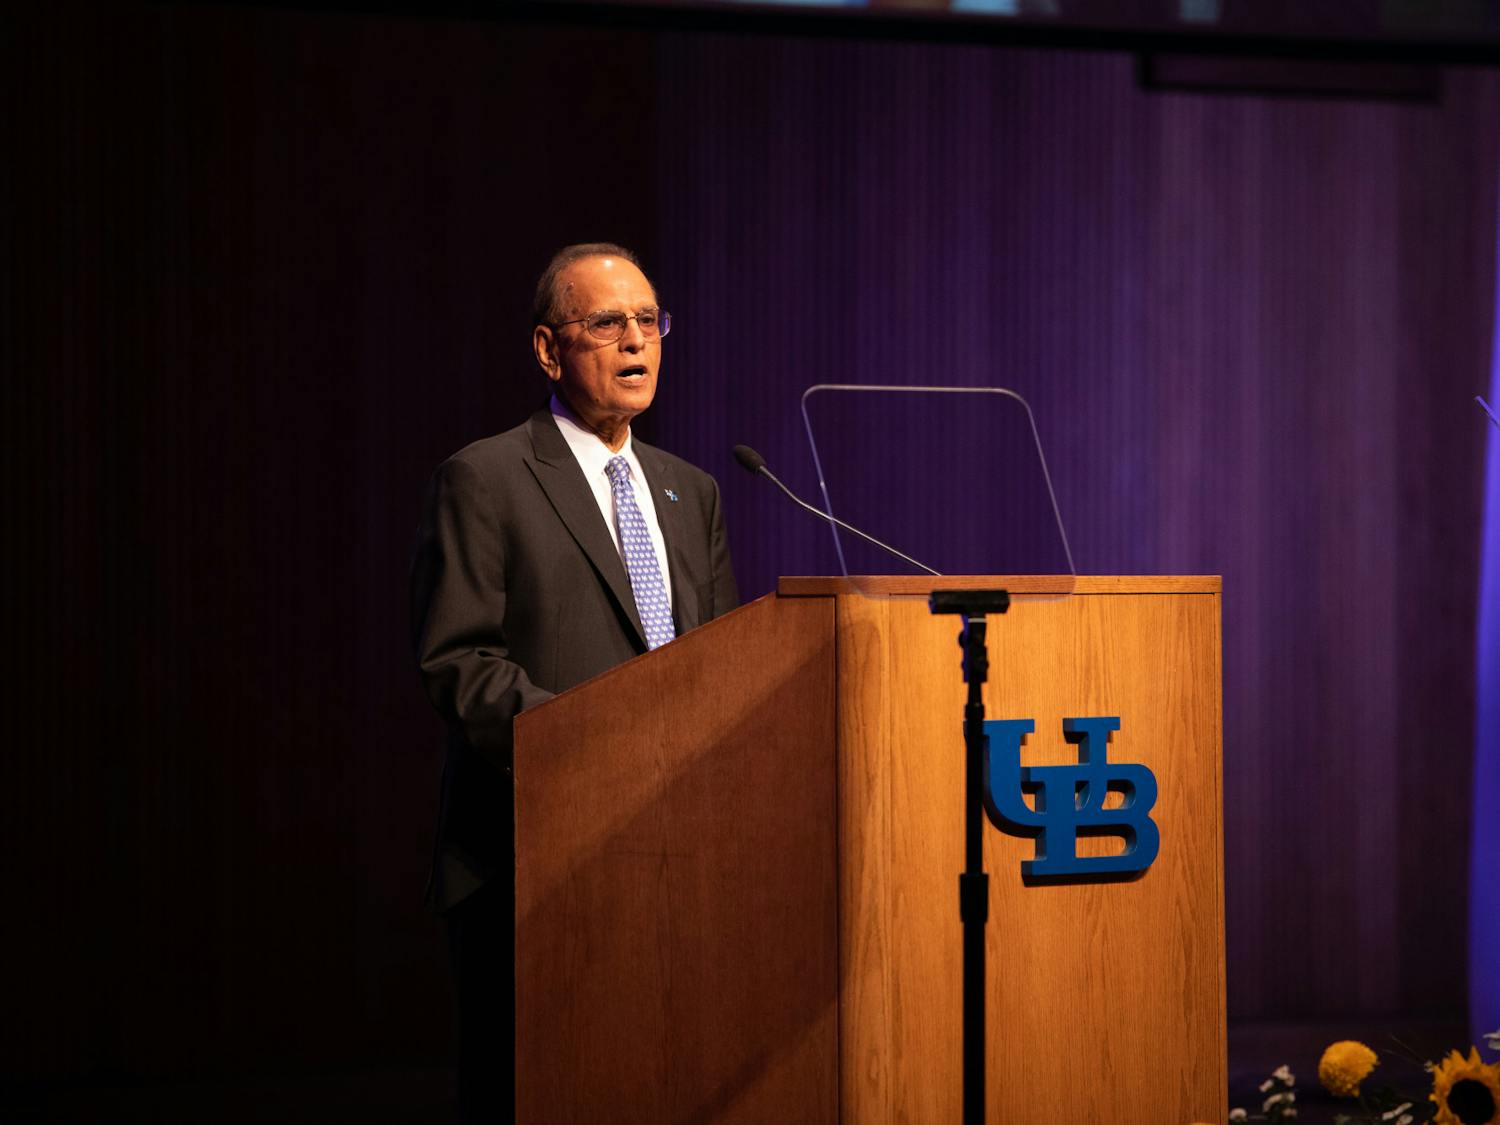 President Satish Tripathi speaks at the annual State of the University Address. The faculty senate will hold a confidence vote on Robin Schulze, the Dean of the College of Arts and Sciences, President Satish Tripathi, and Provost A. Scott Weber on April 16 at 3 p.m.

